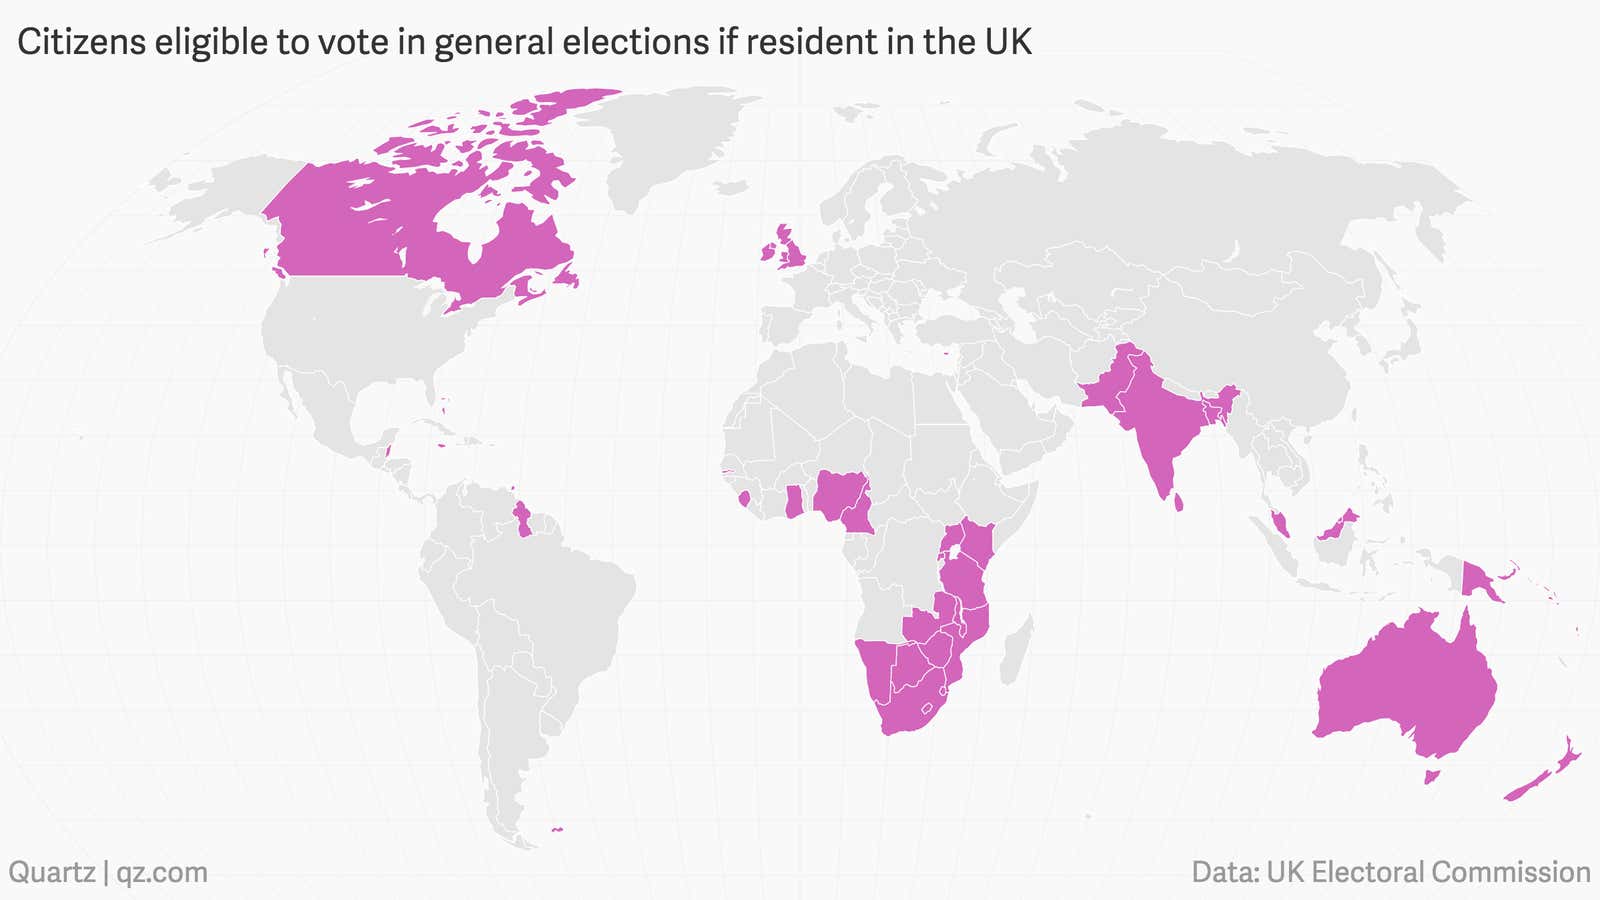 Some 4 million non-Brits can vote in the UK election